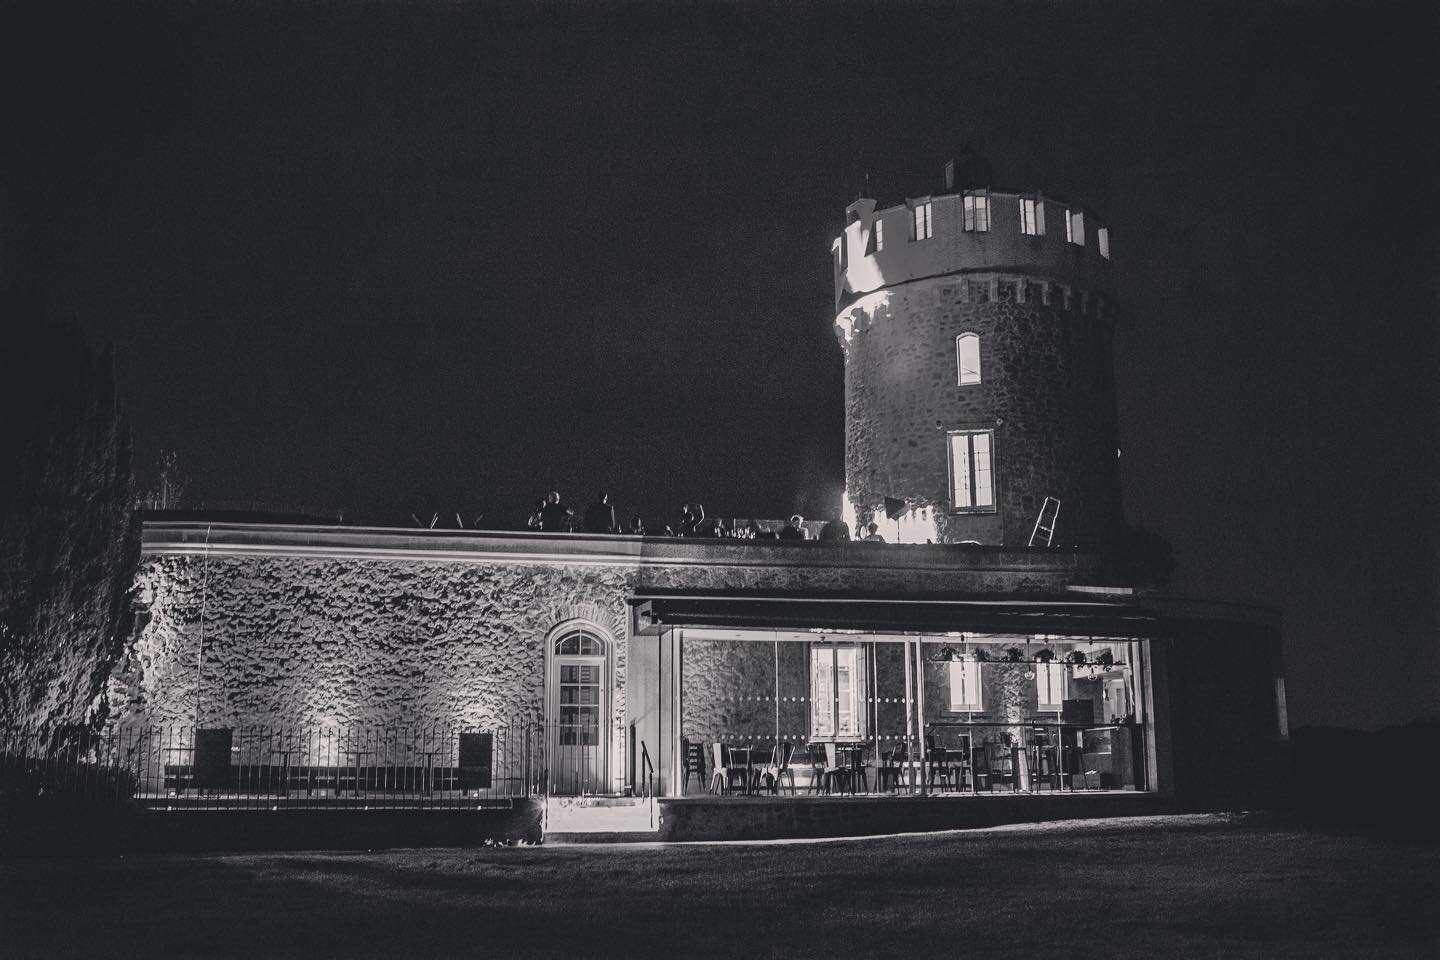 You can now watch the music video for &lsquo;orchestral space&rsquo; on YouTube featuring live footage from @cliftonobservatory @thecrownbristol , a free party under M32 and house party in Easton. 

Photo by @ania_shrimpton 
.
.
.
#techno #newtechno 